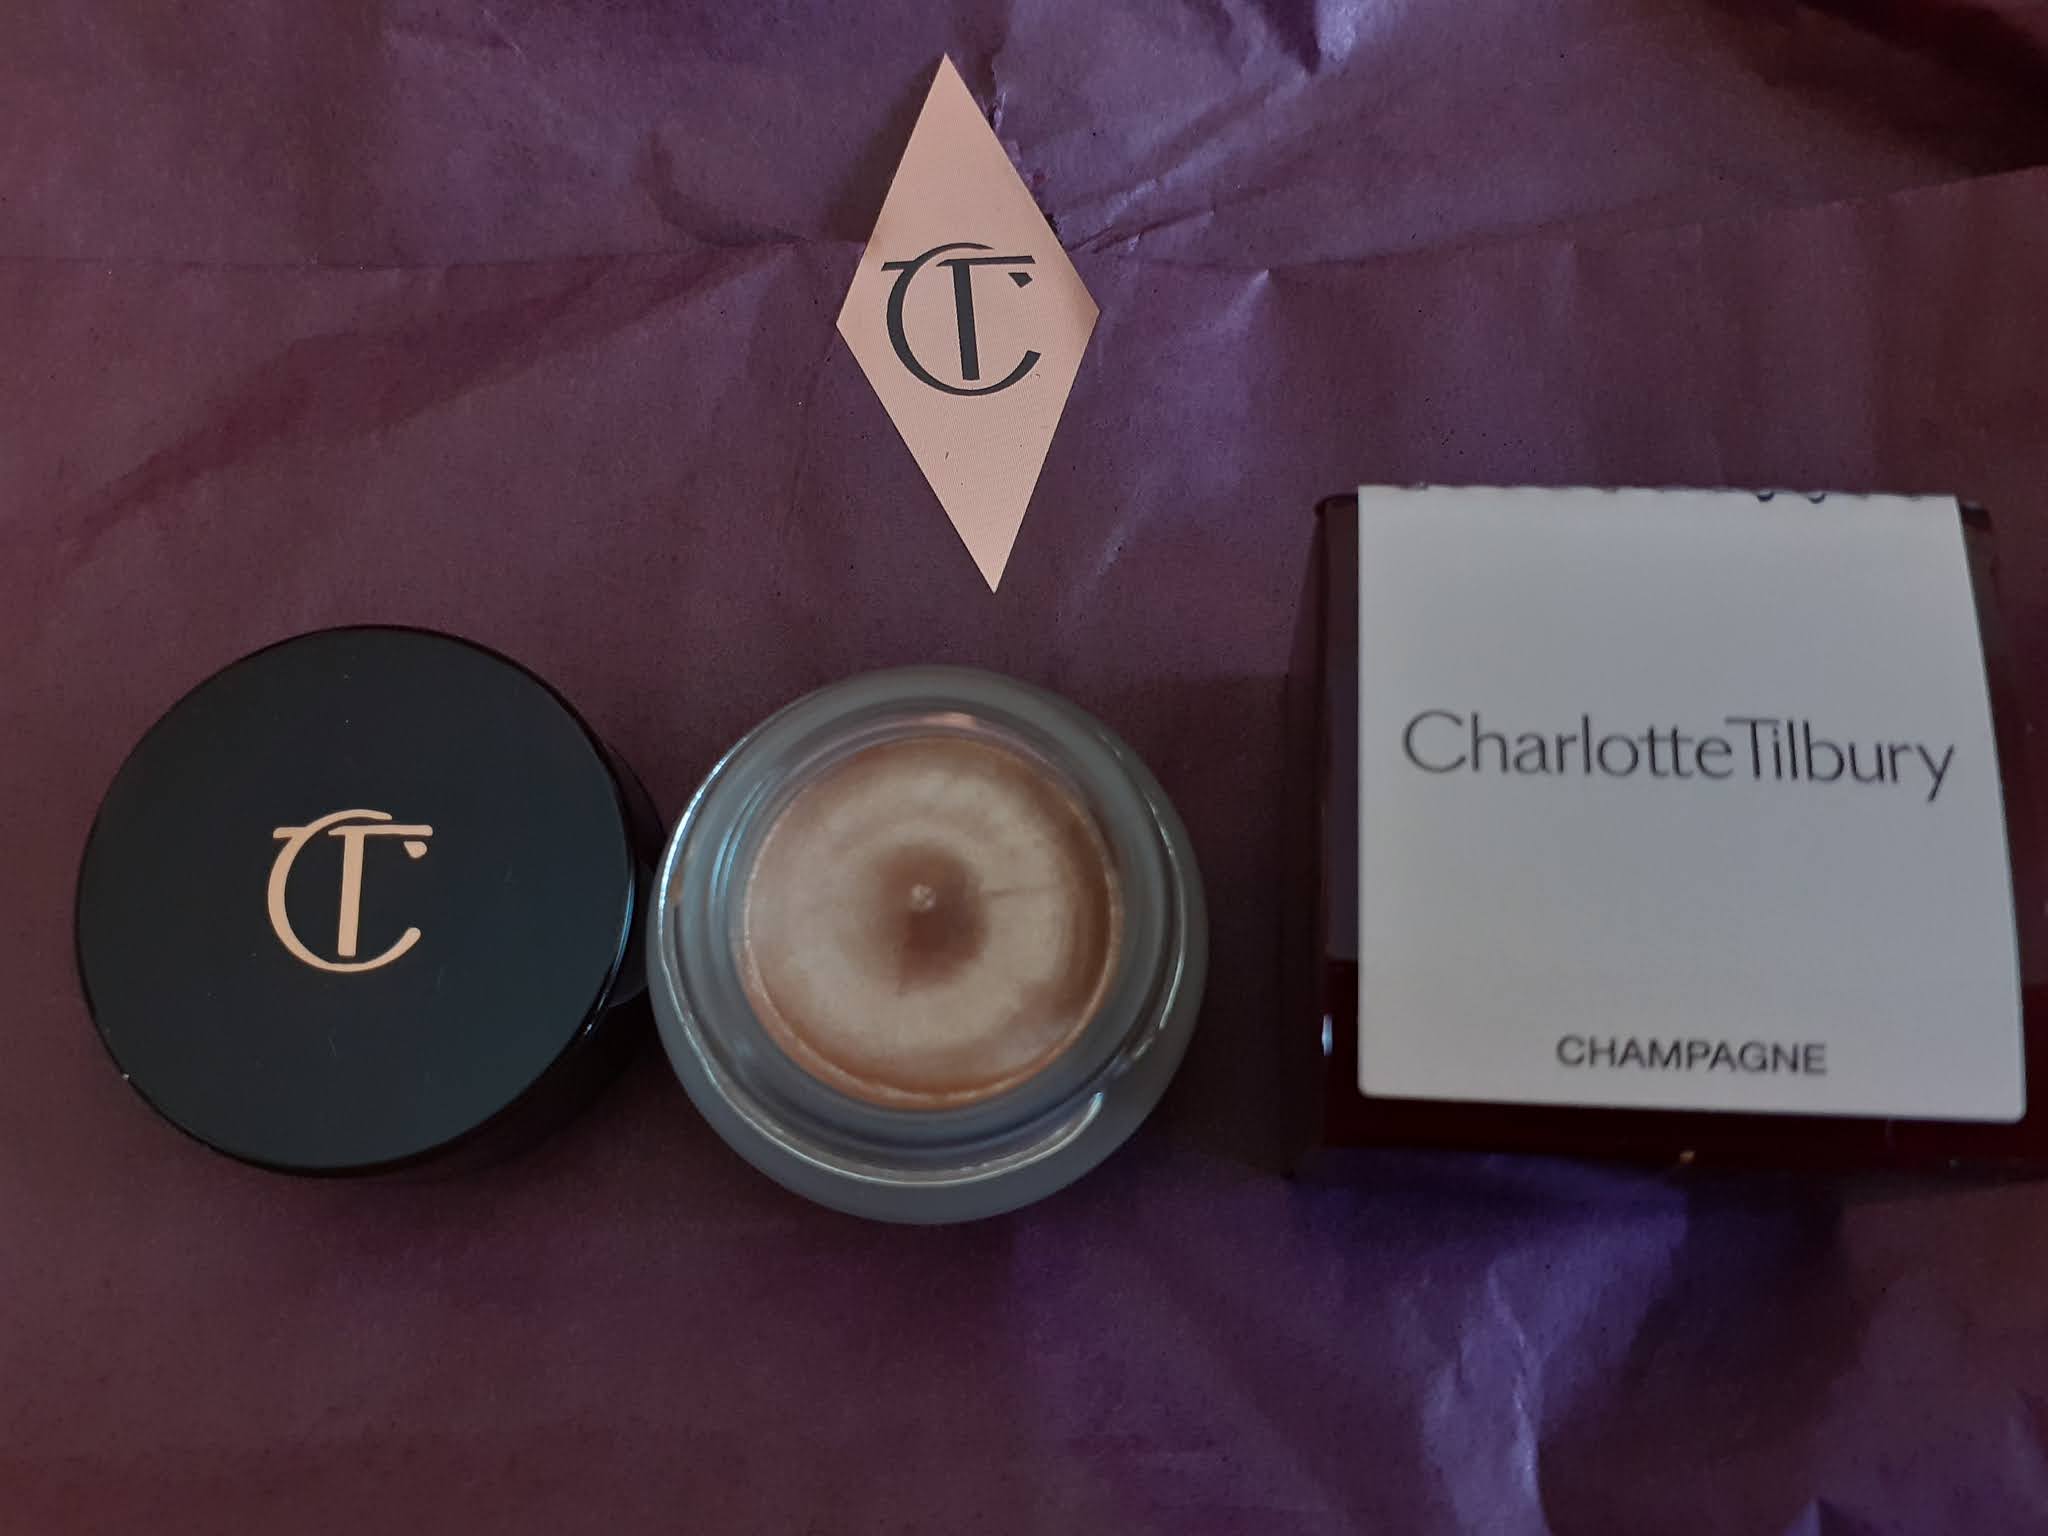 Chanel Skincare for the Weekend - Inthefrow